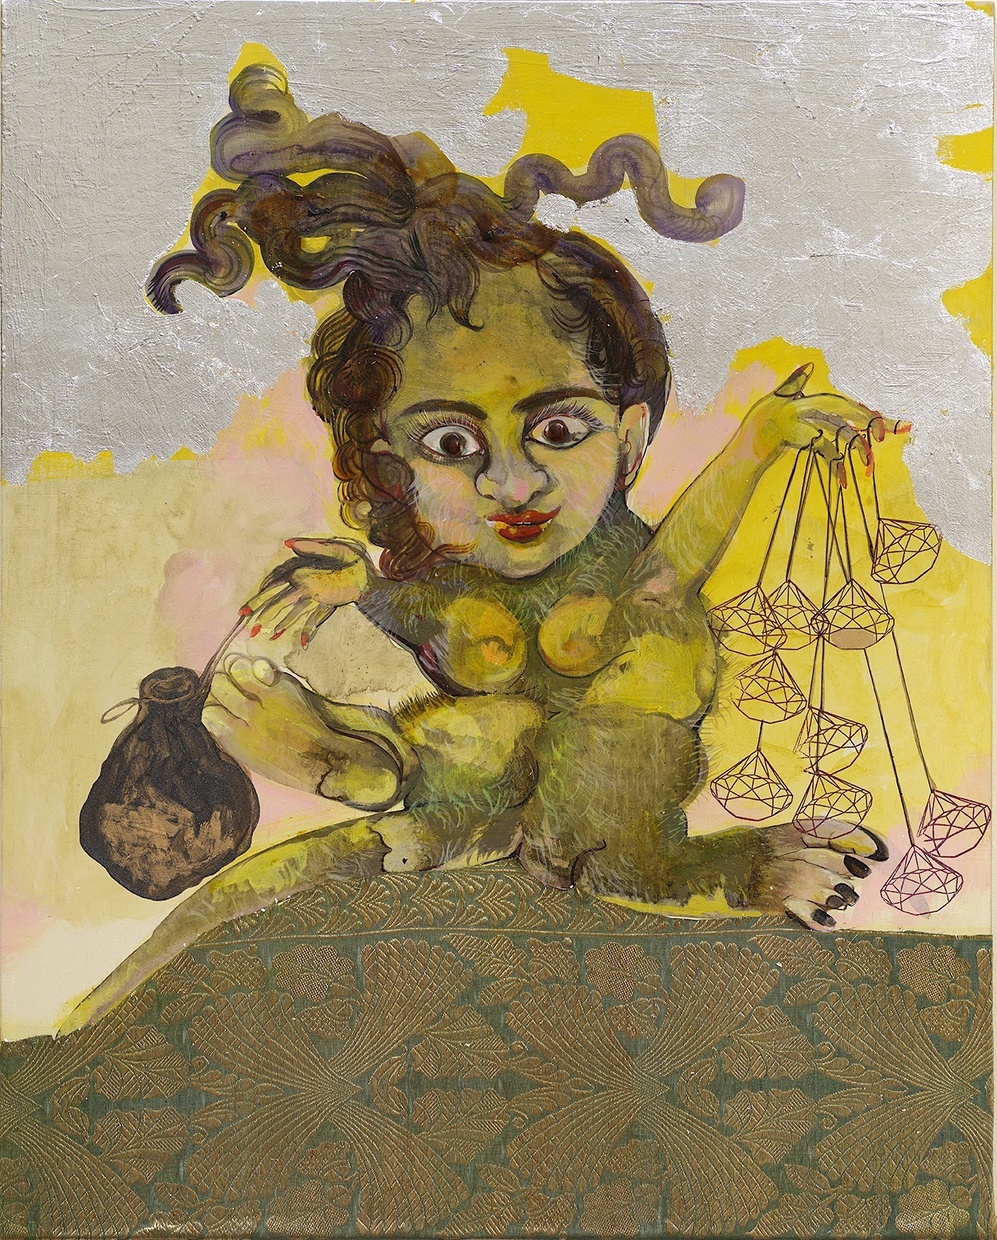 A painting of a small, hairy, female humanoid with brown curly hair holding a bag in one hand and numerous diamonds attached to strings in the other hand.